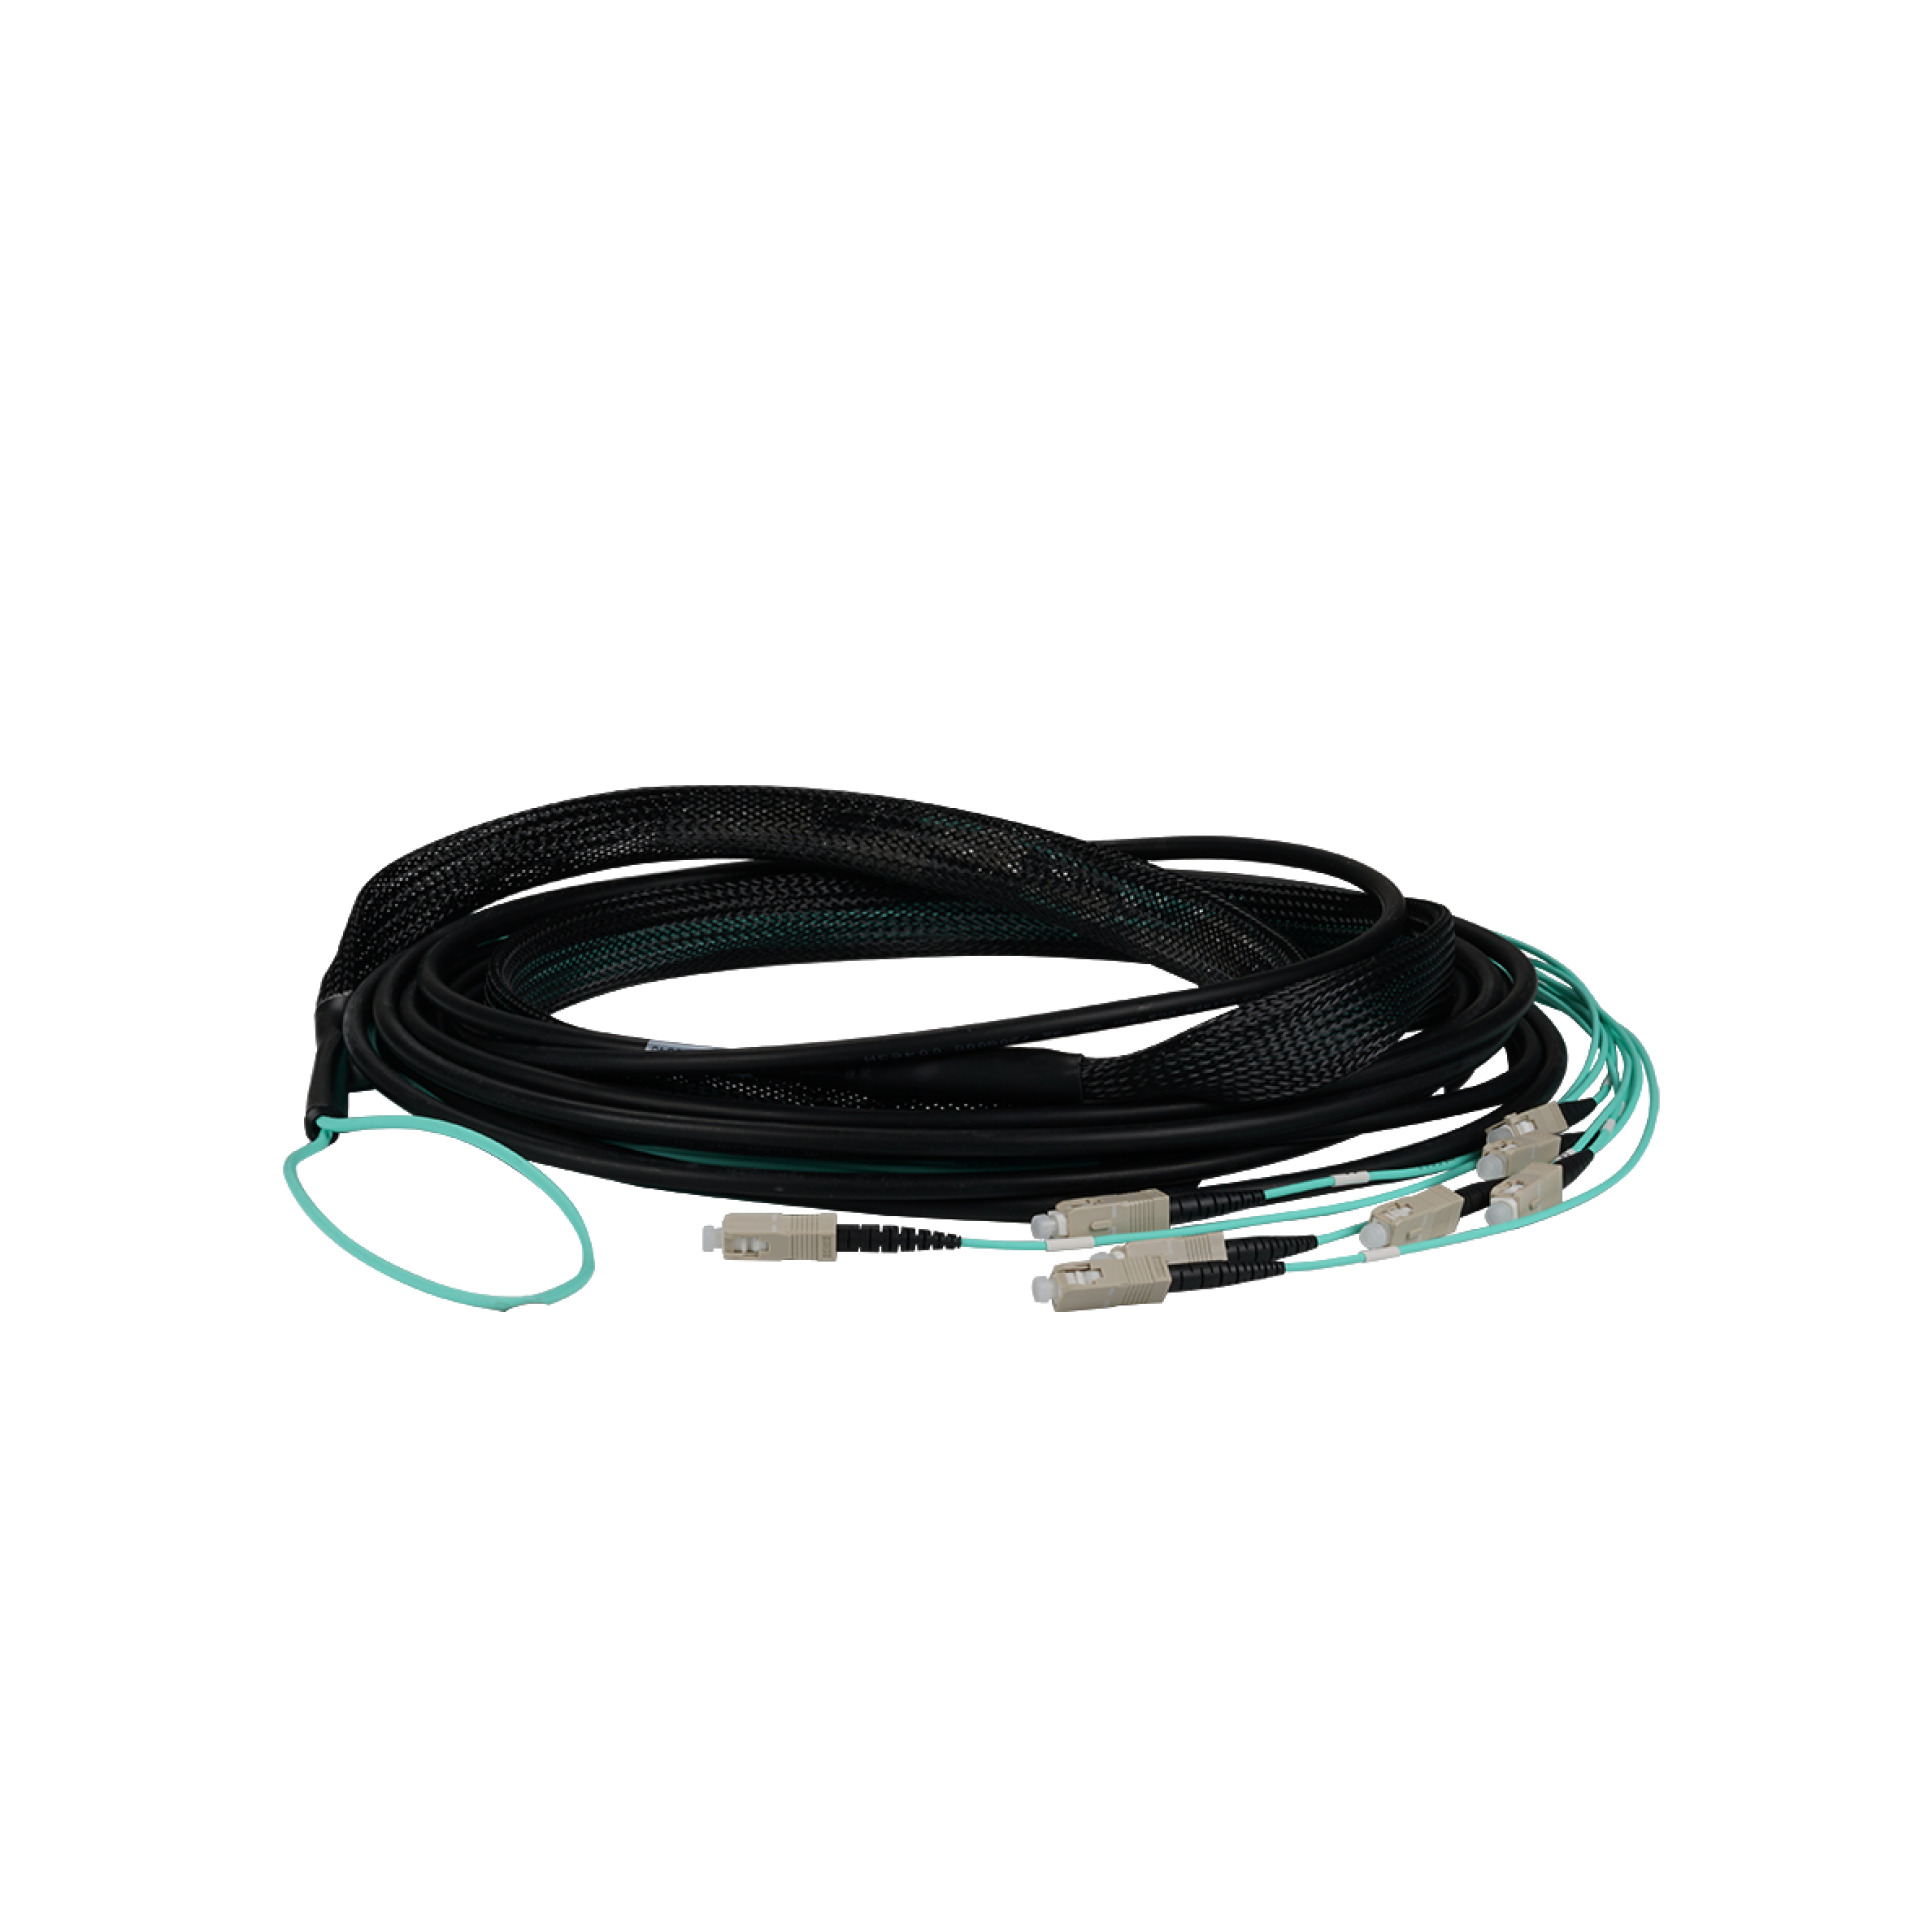 Trunk cable U-DQ(ZN)BH 8G 50/125, SC/SC OM3 160m